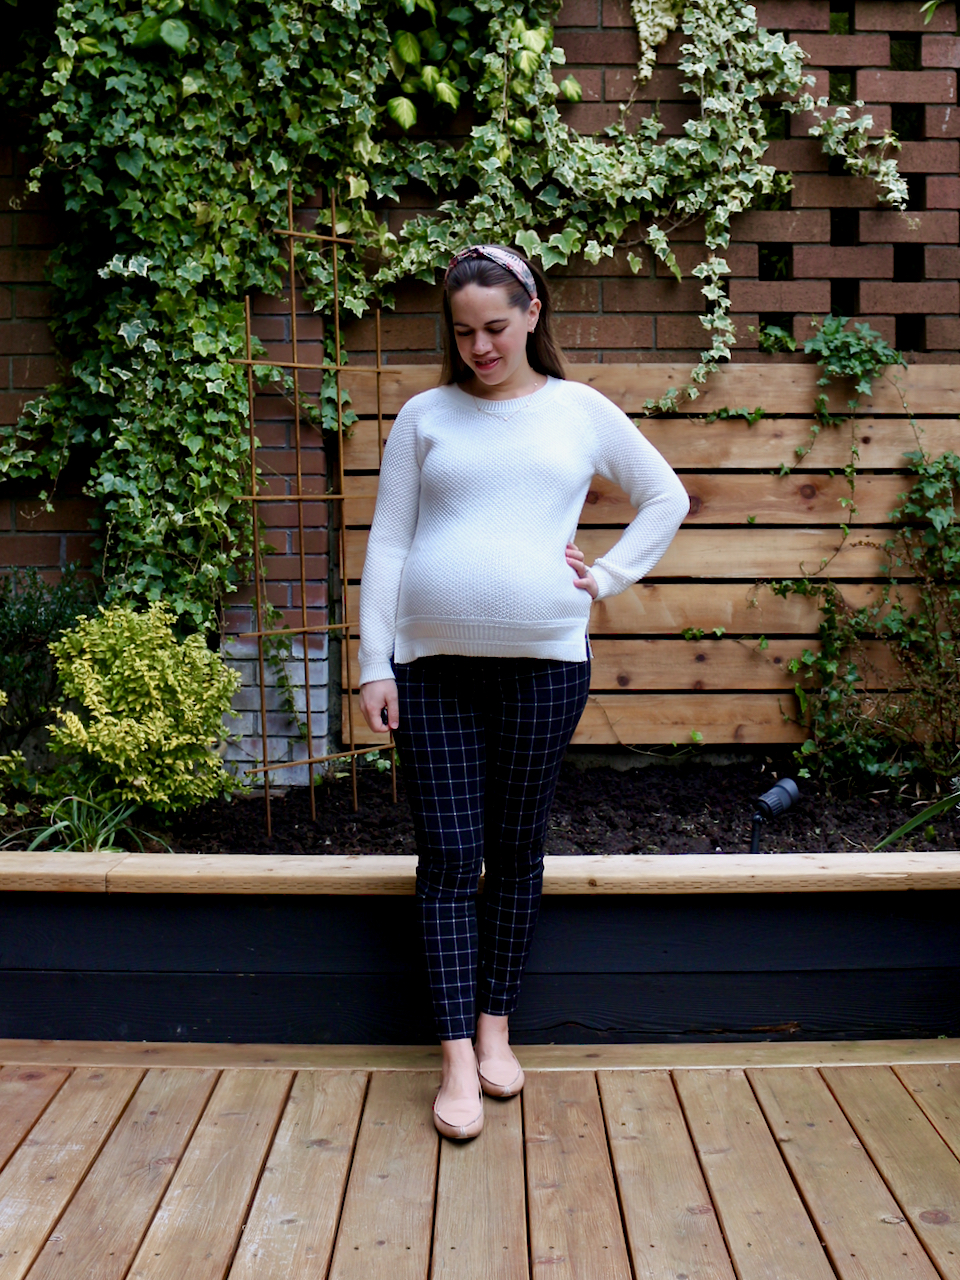 Jules in Flats - Maternity Pixie Ankle Pants with Sweater (Business Casual Workwear on a Budget)